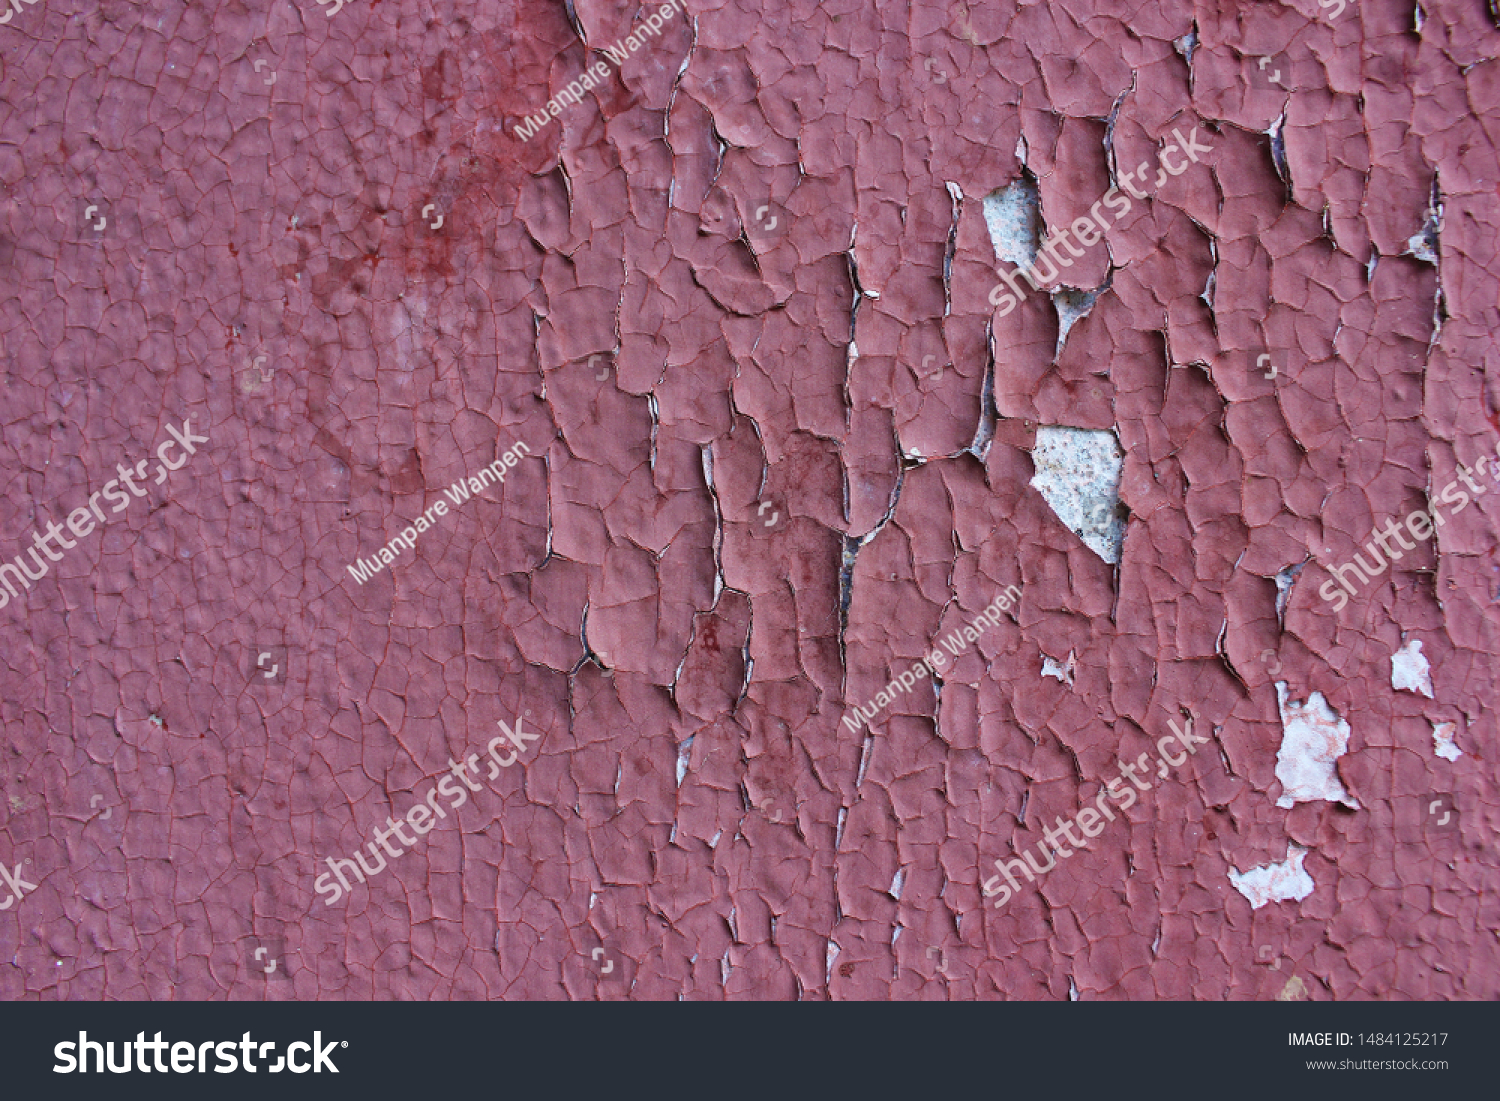 The walls of the old house red color cracked. cracked plaster as a background or texture. Old painting cracked. #1484125217